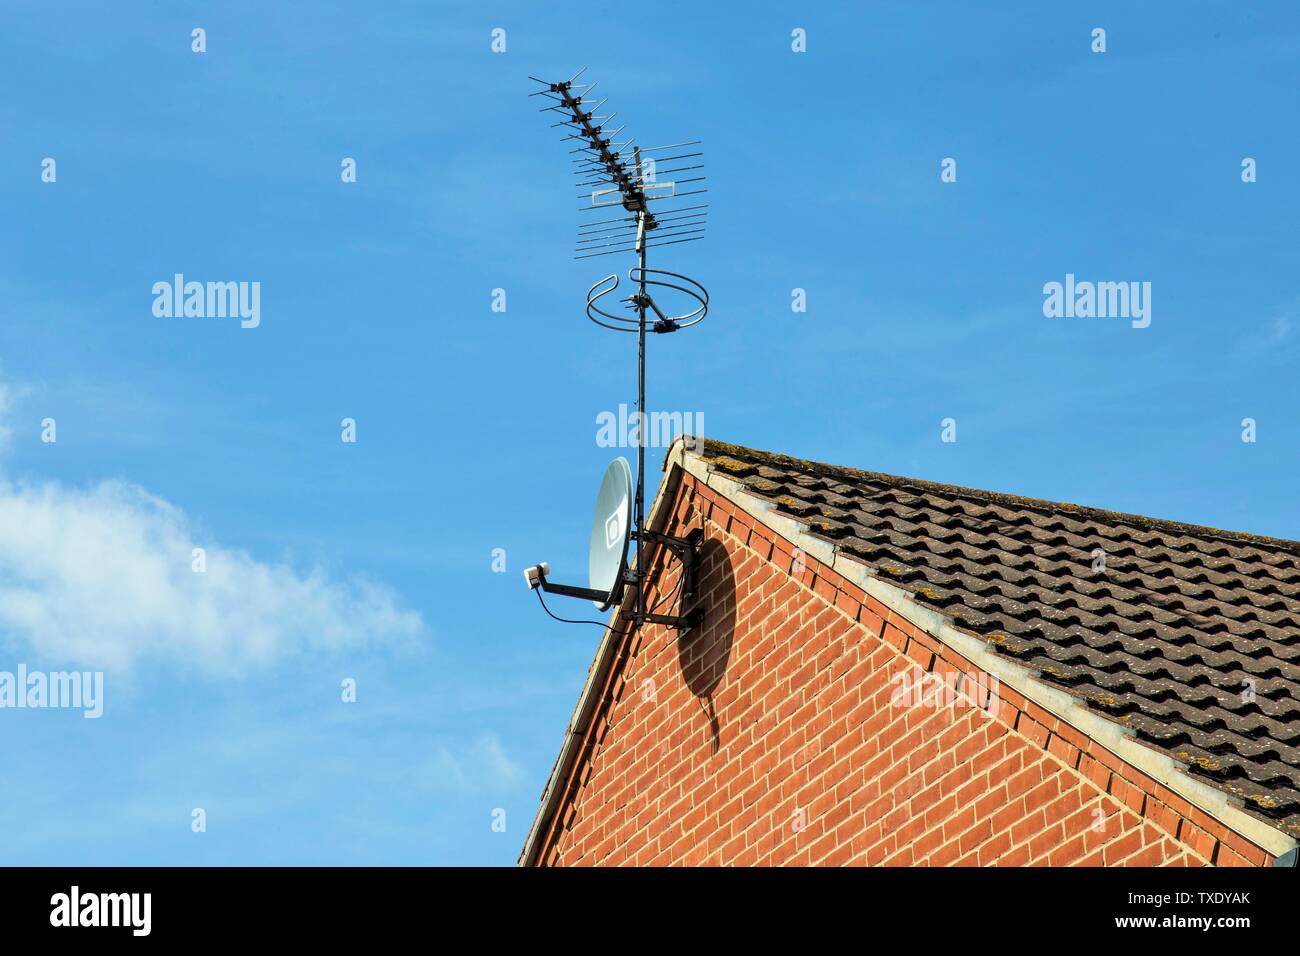 Cable Tv Dish Stock Photos Cable Tv Dish Stock Images Alamy